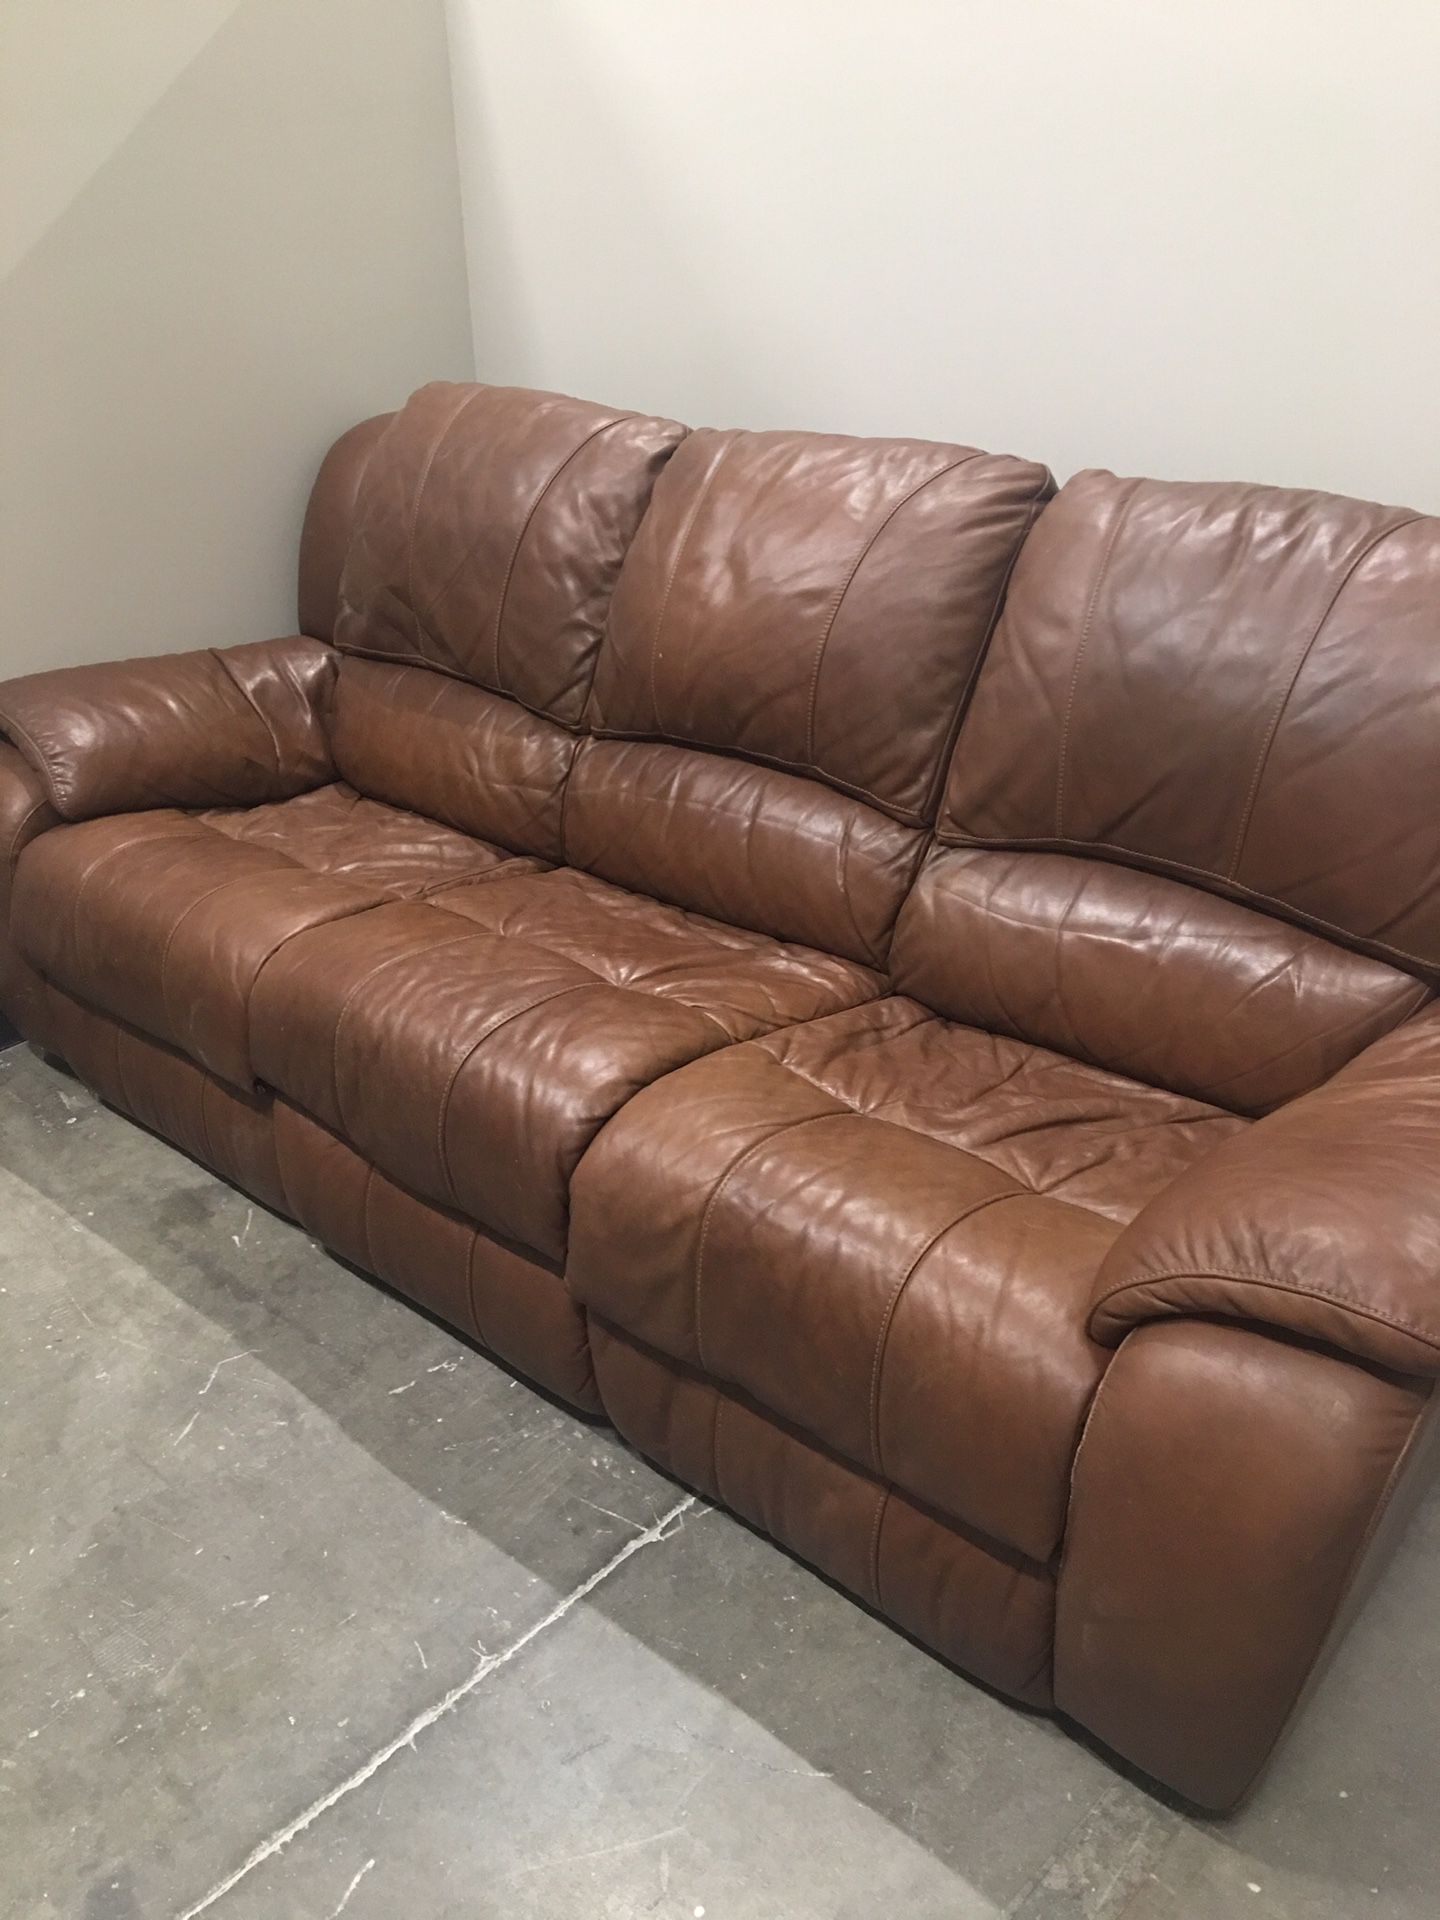 Leather couch with recliner